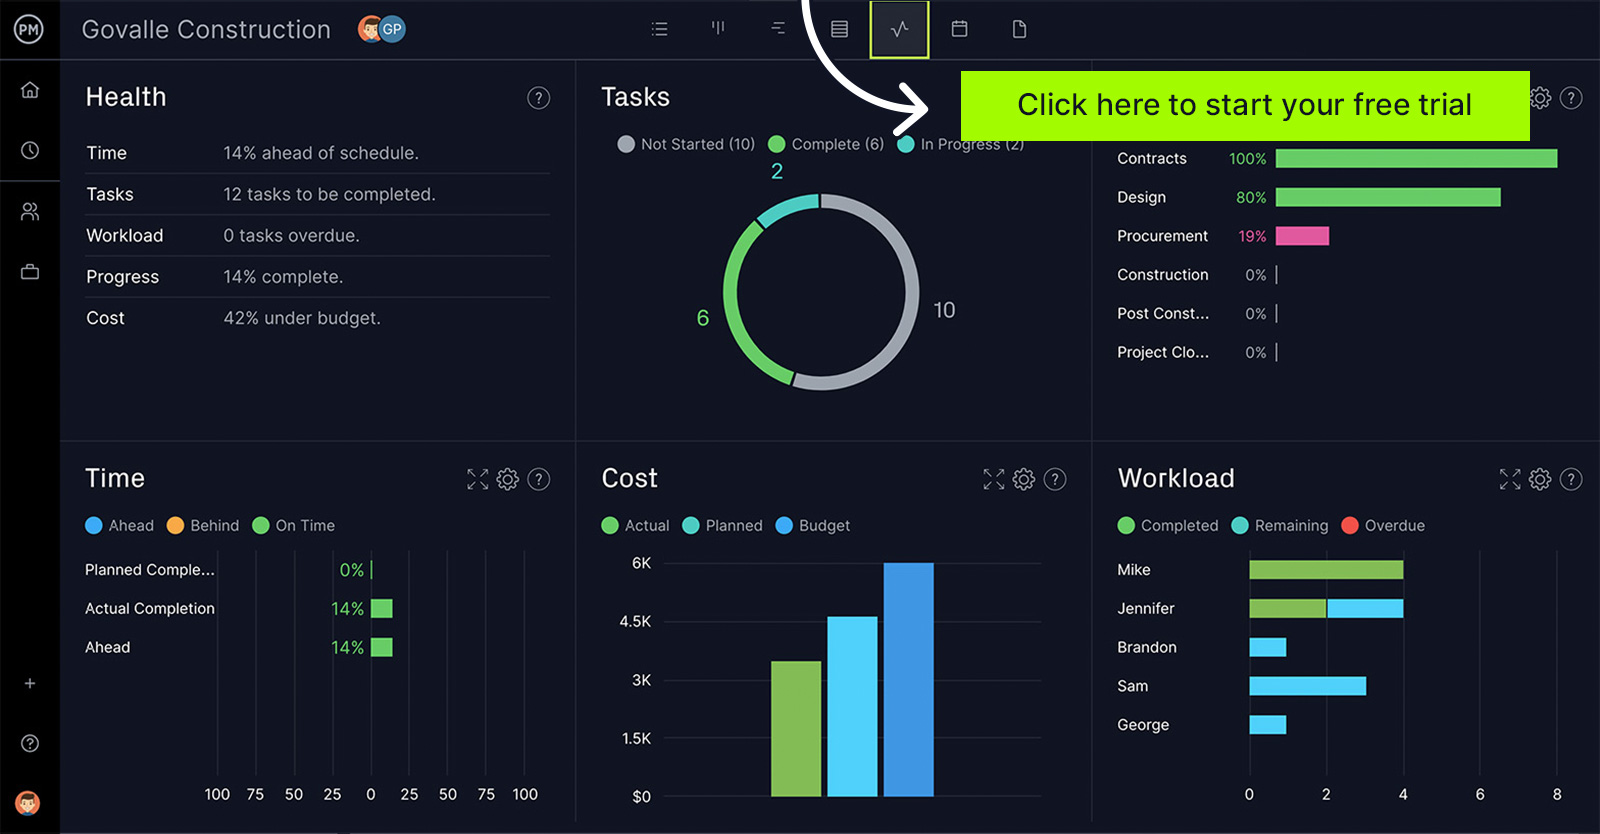 real-time dashboard tracking health, tasks and more